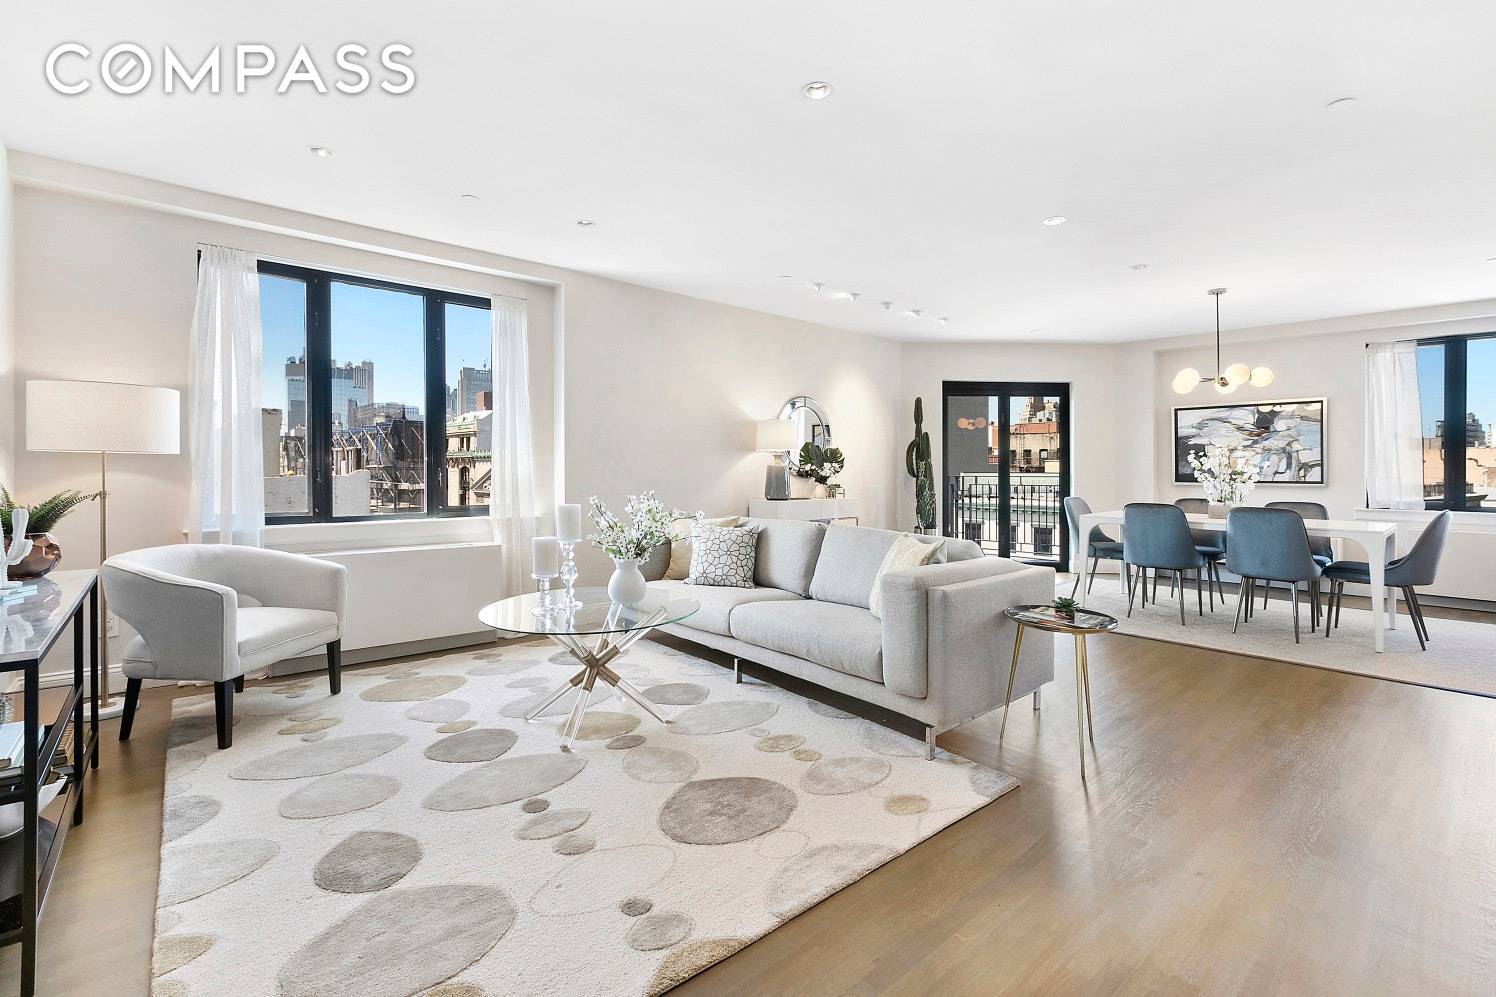 A spectacular duplex penthouse offering at 153 Bowery Street in one of the most sought after neighborhoods in Manhattan, the crossroads of the Lower East Side and Nolita.